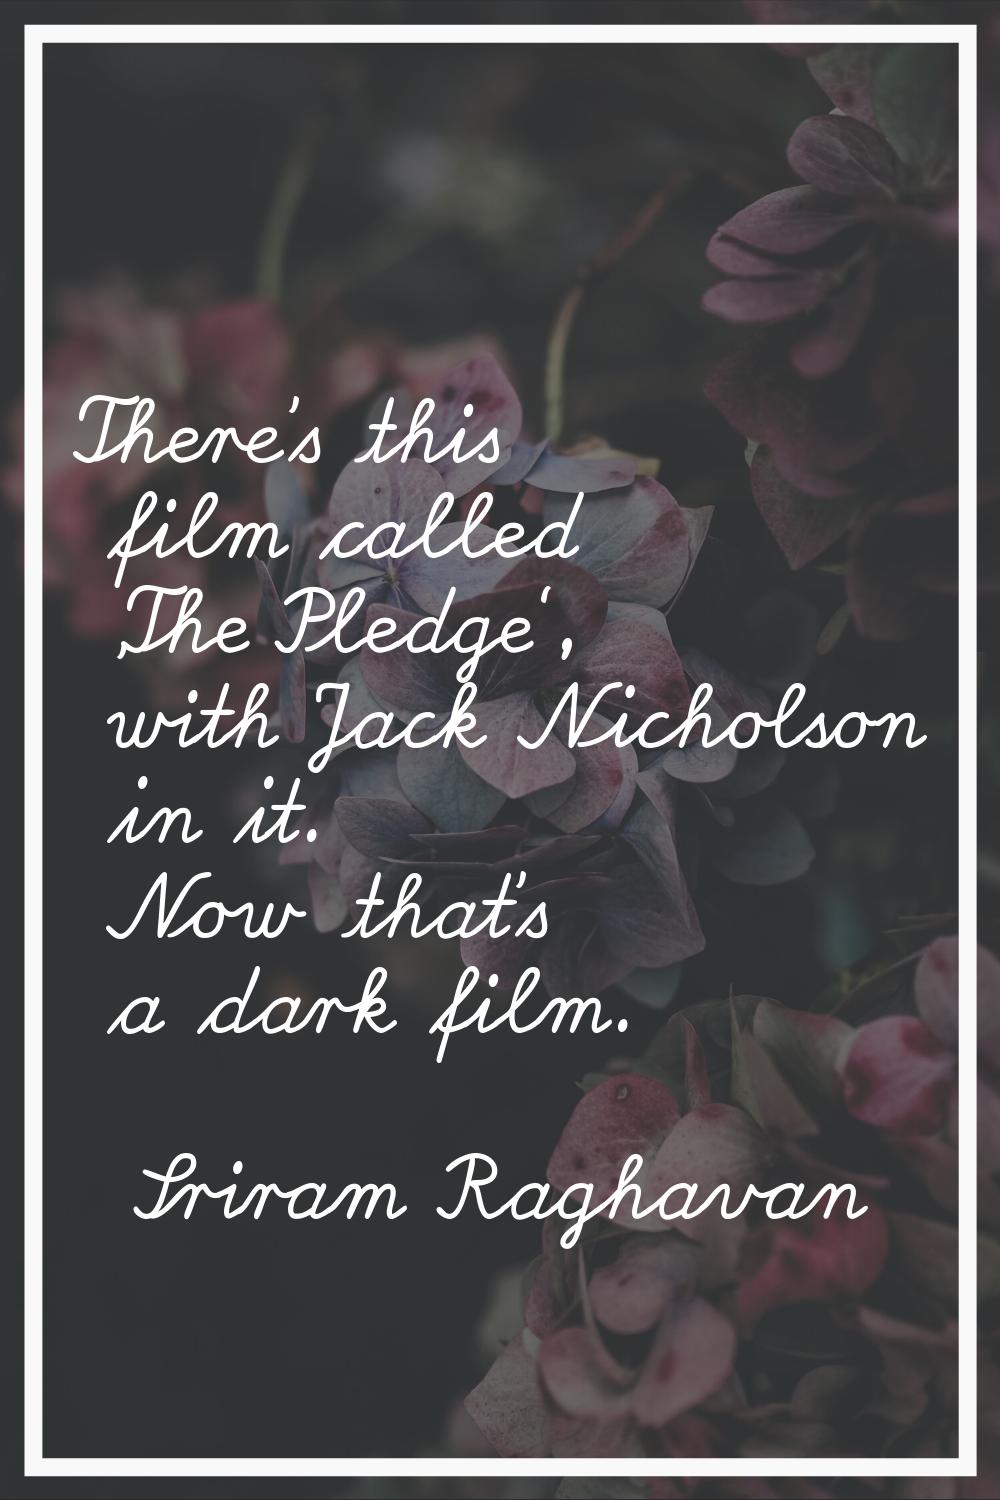 There’s this film called 'The Pledge', with Jack Nicholson in it. Now that’s a dark film.